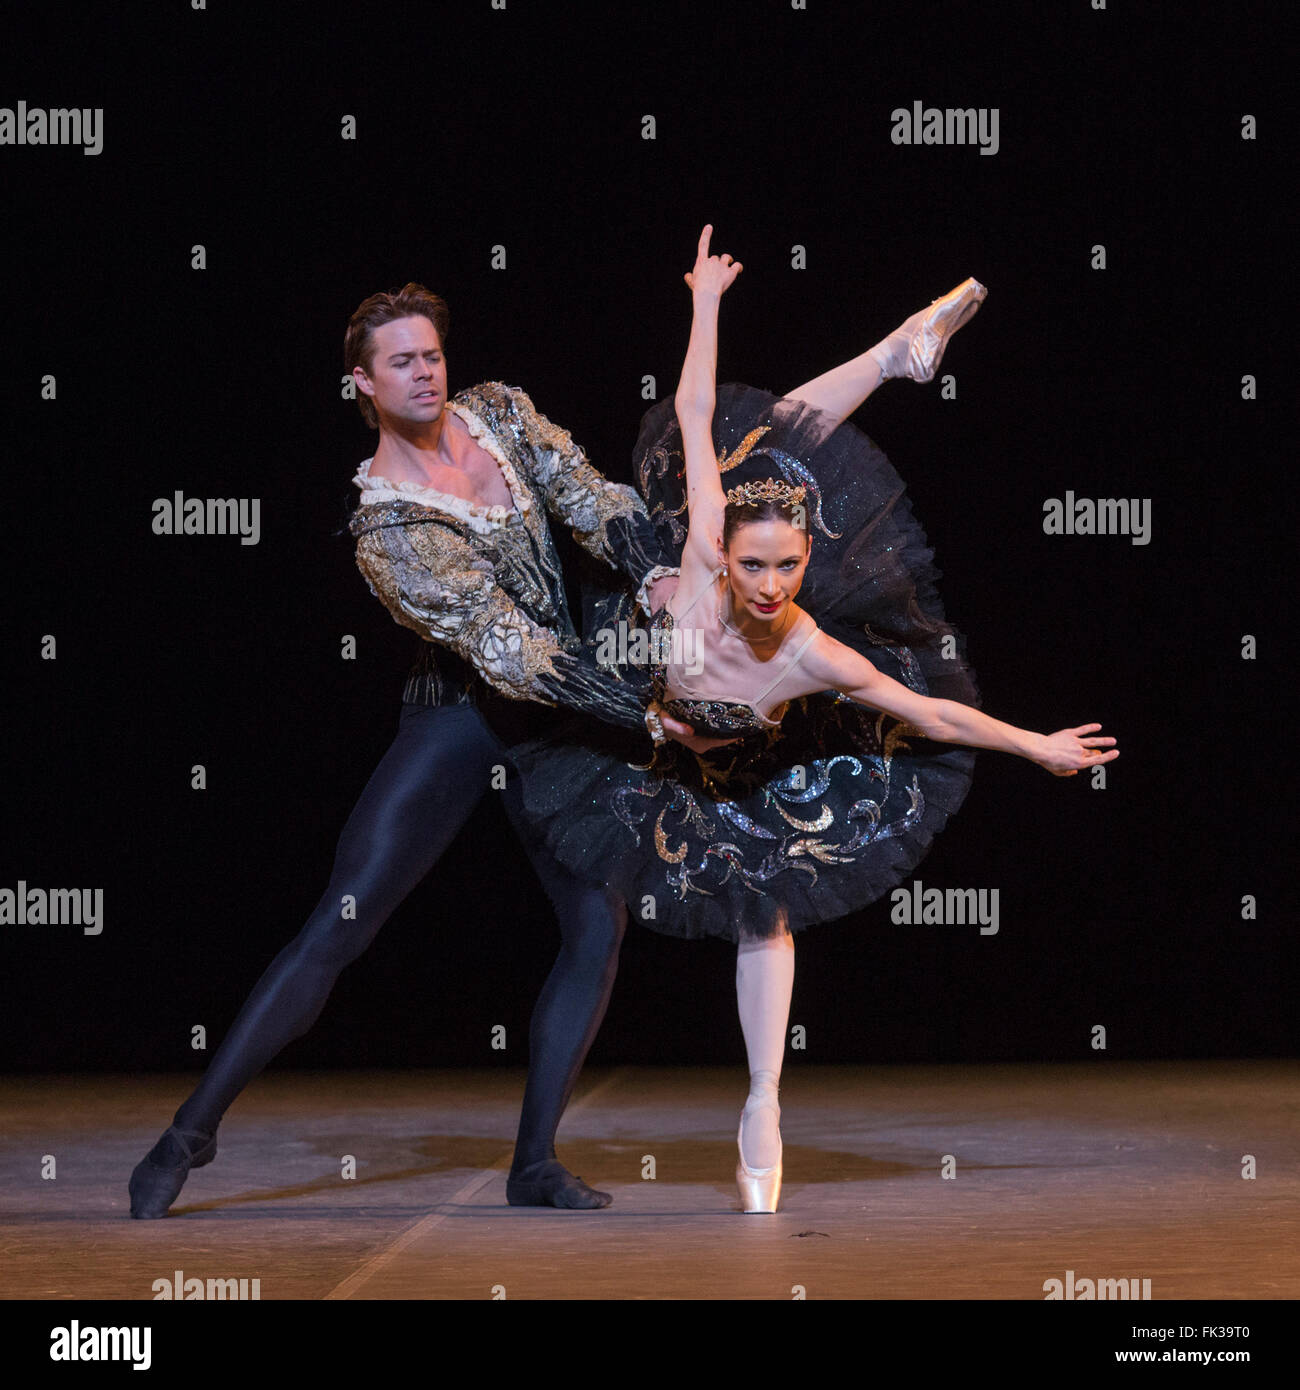 London, UK. 6 March 2016. Black Swan / Swan Lake performed by Stock Photo -  Alamy